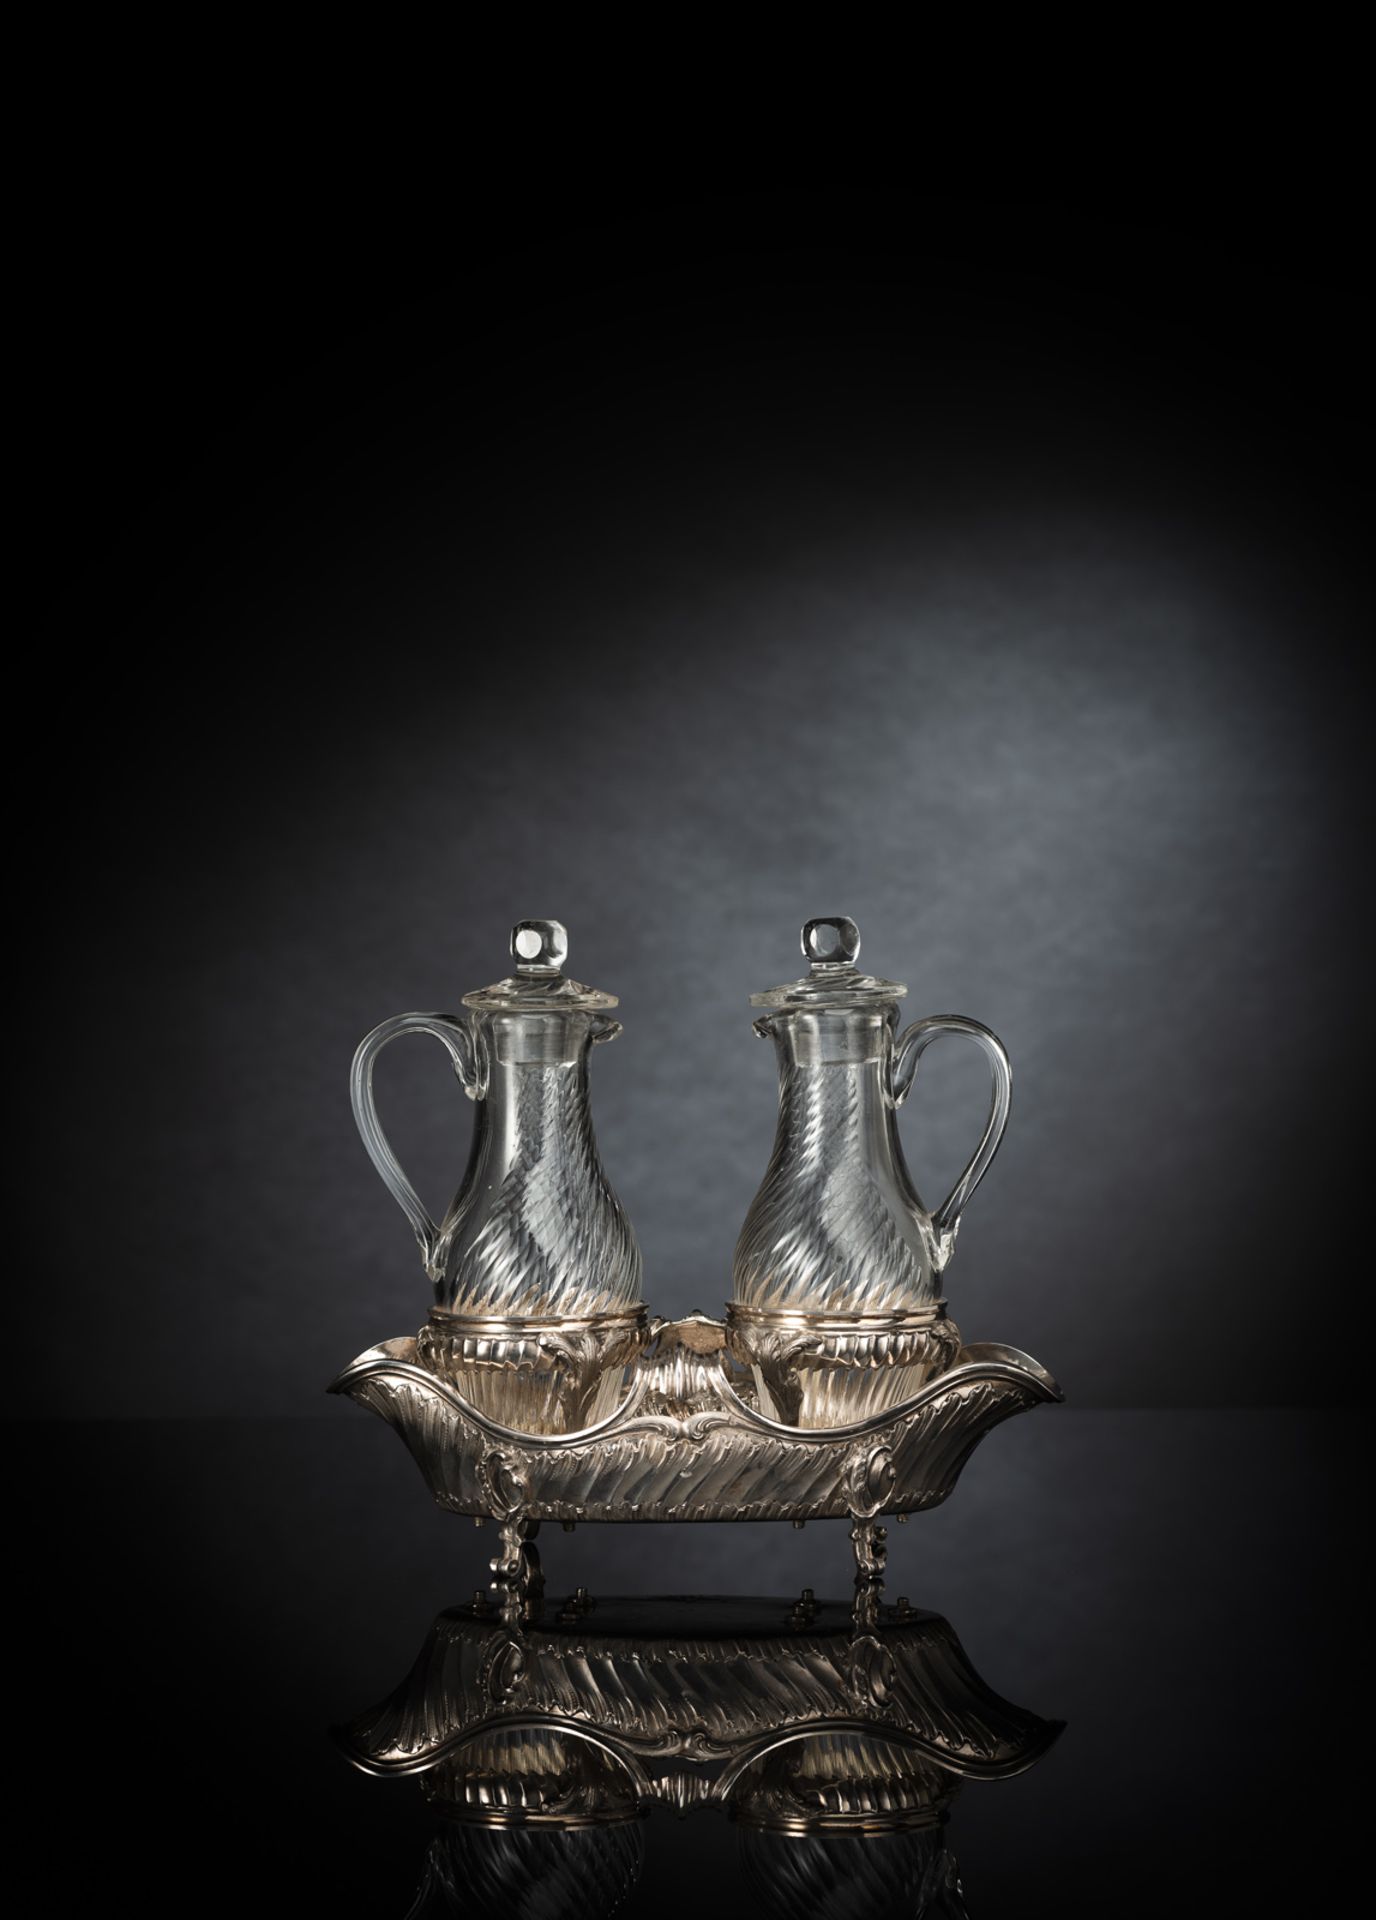 A FRENCH SILVER CRUET STAND FOR OIL AND VINEGAR